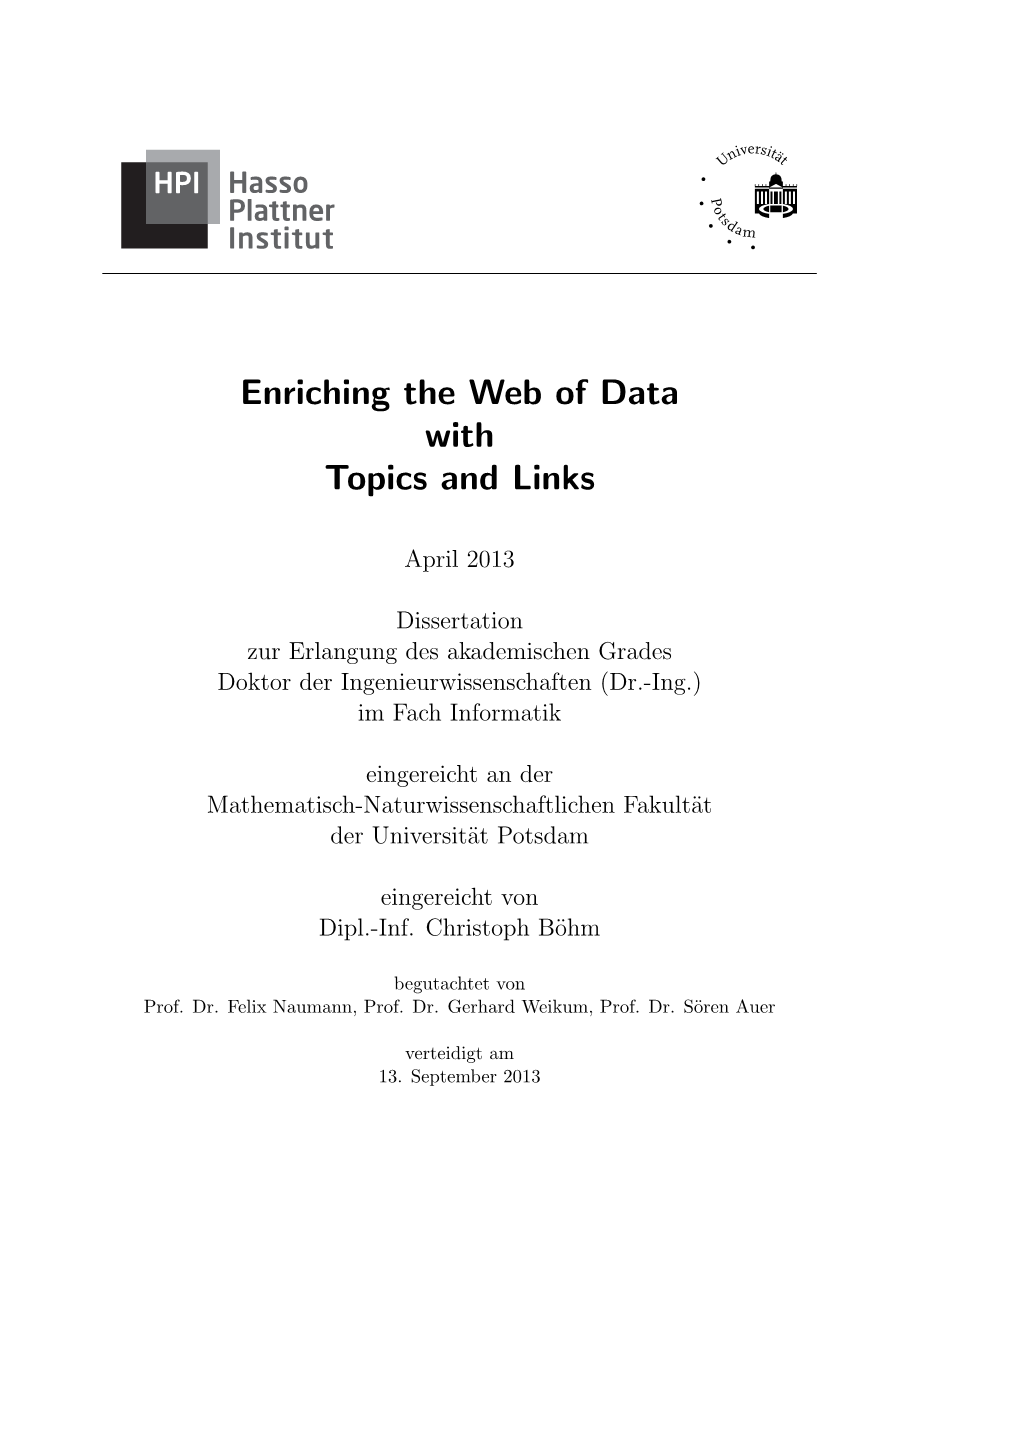 Enriching the Web of Data with Topics and Links